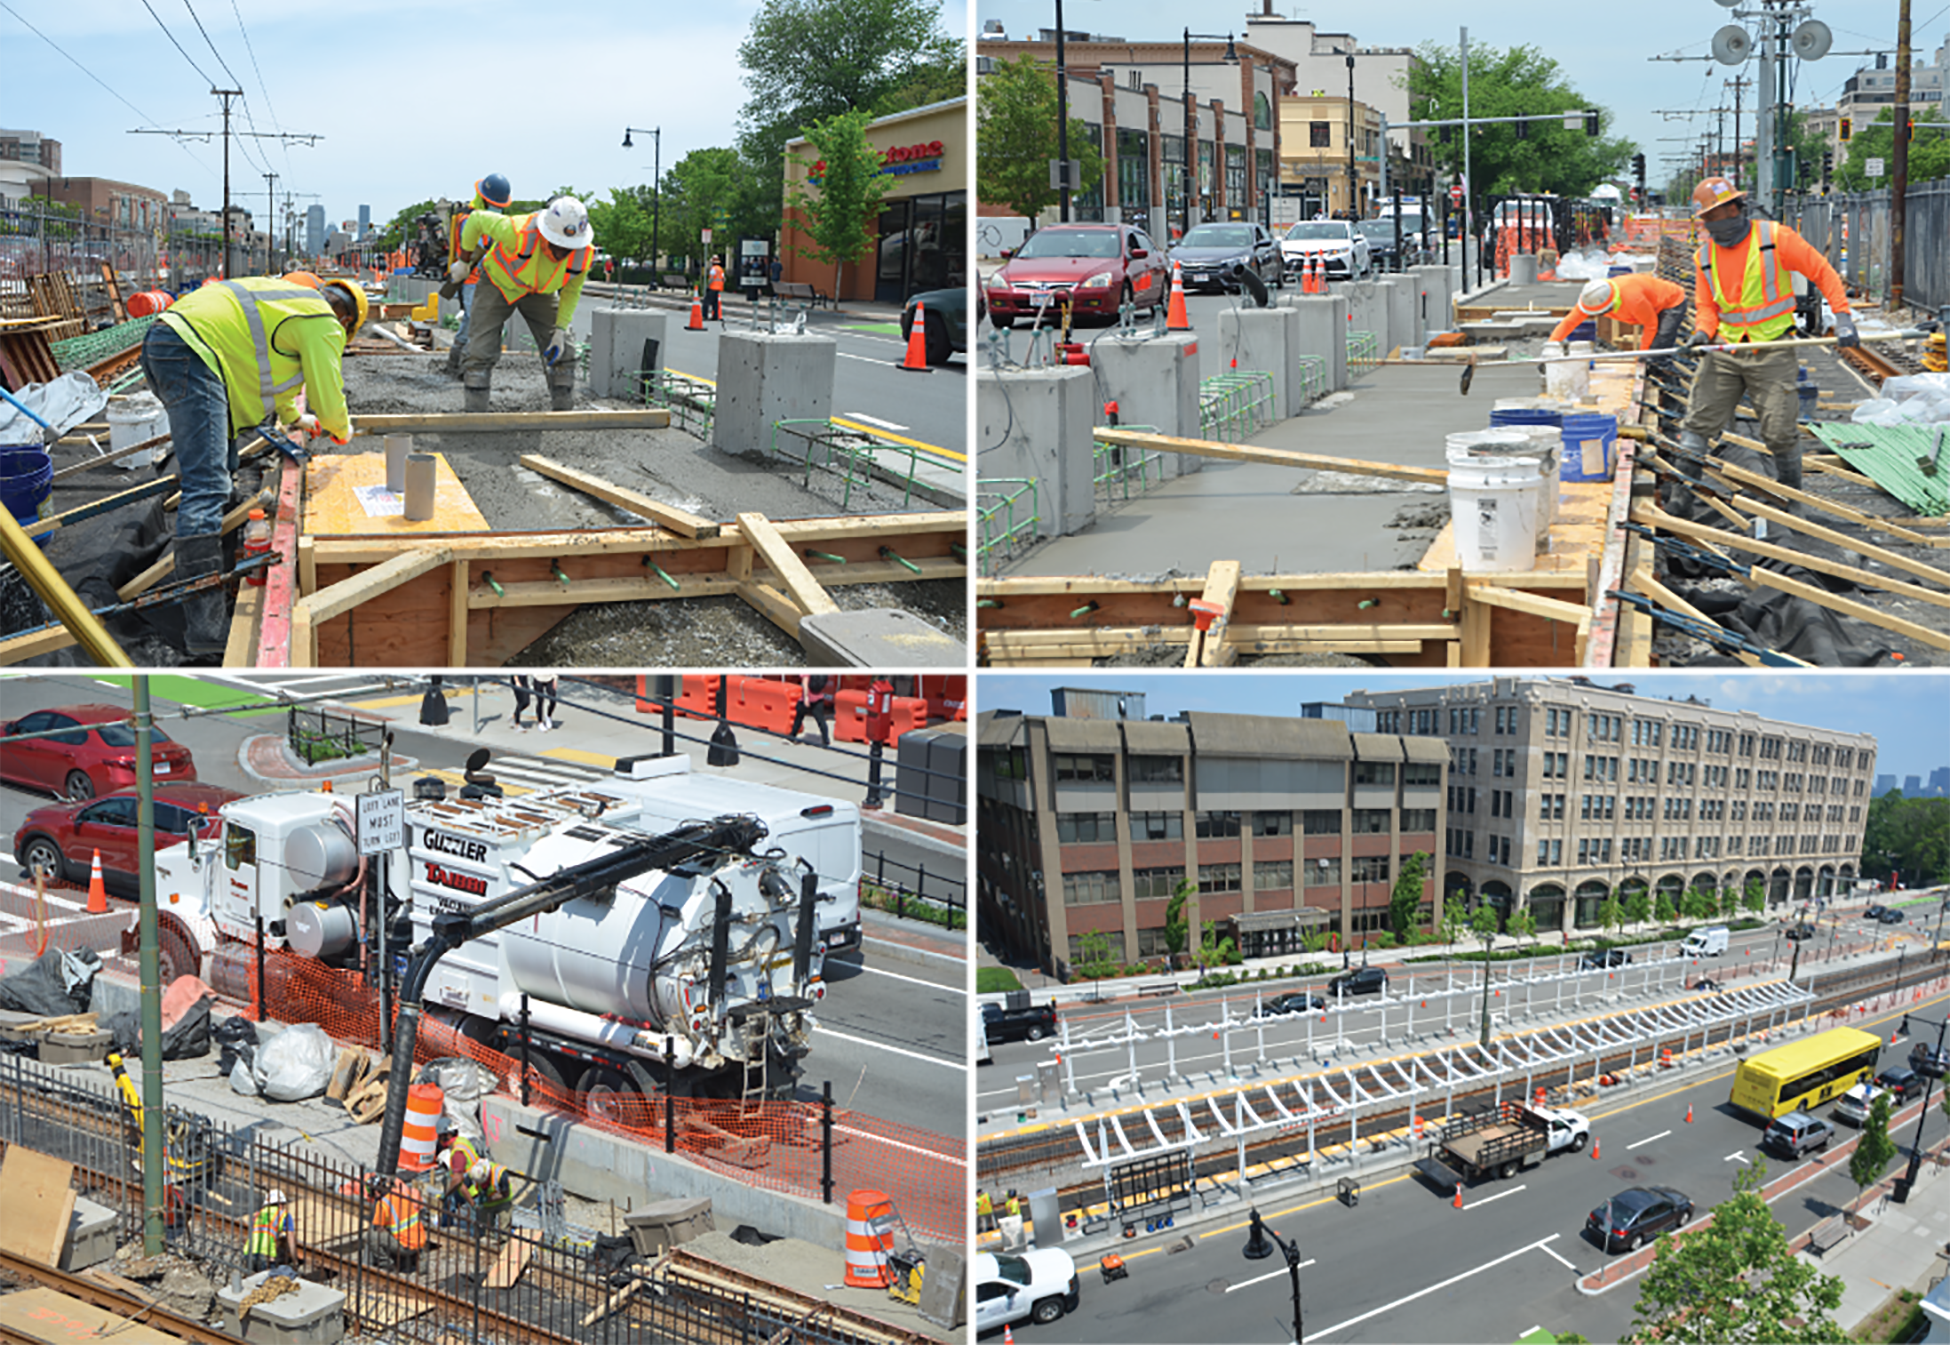 In-progress construction at the New Amory Street Station on Commonwealth Ave.